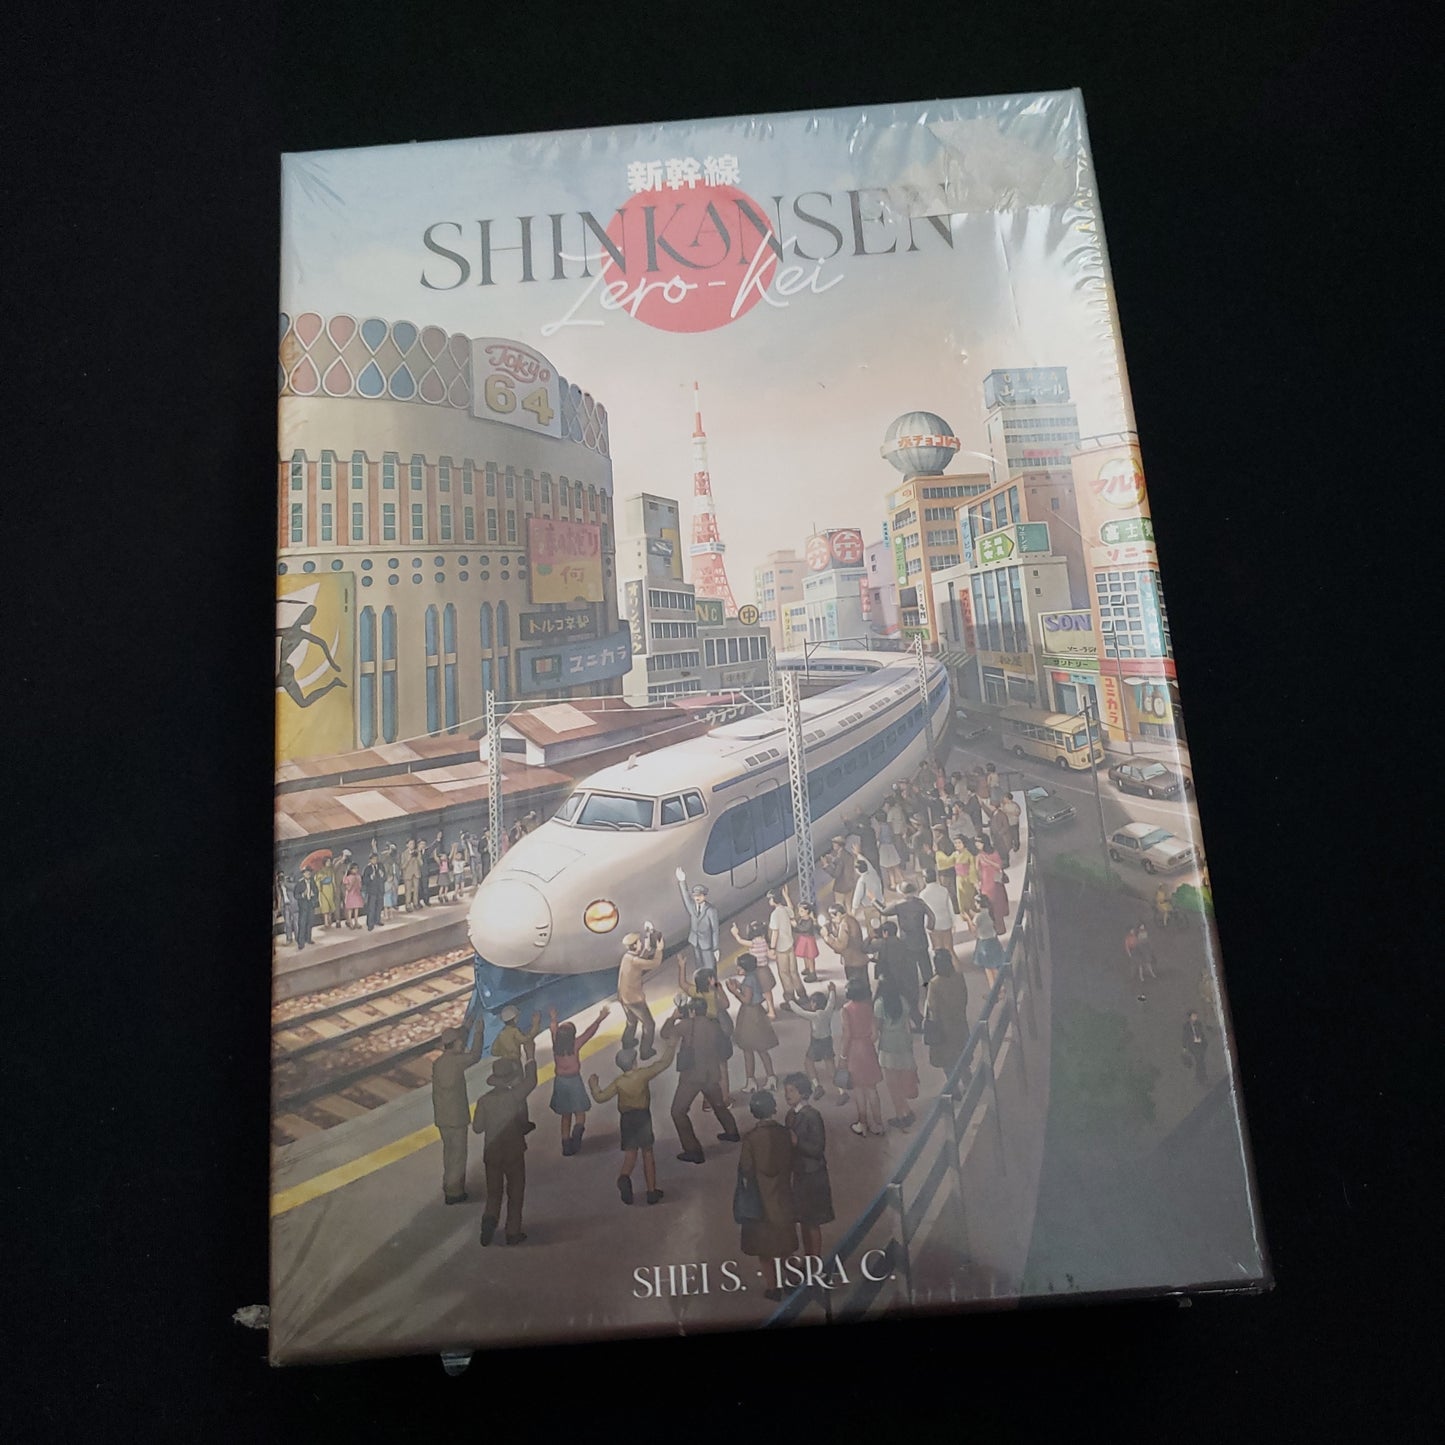 Image shows the front cover of the box of the board game Shinkansen: Zero-Kei